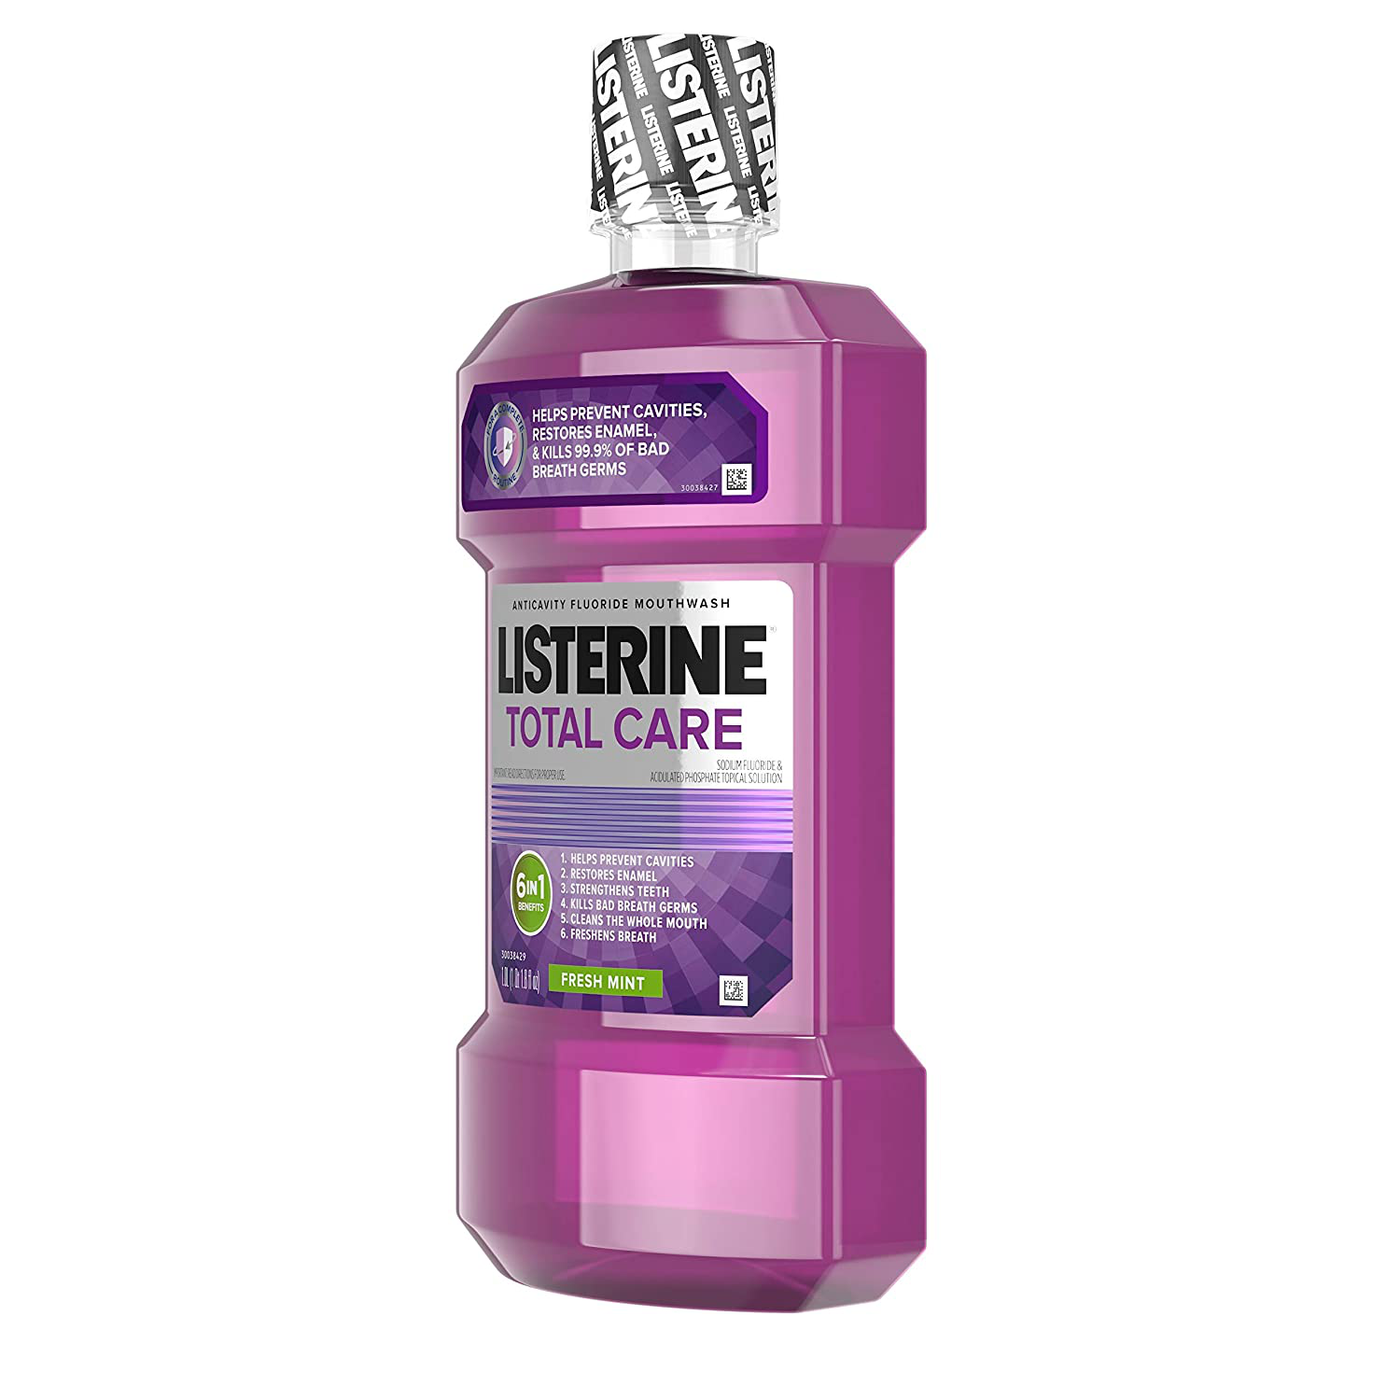 Listerine Total Care Anticavity Mouthwash, 6 Benefit Fluoride Mouthwash for Bad Breath and Enamel Strength, Fresh Mint Flavor, 1 L